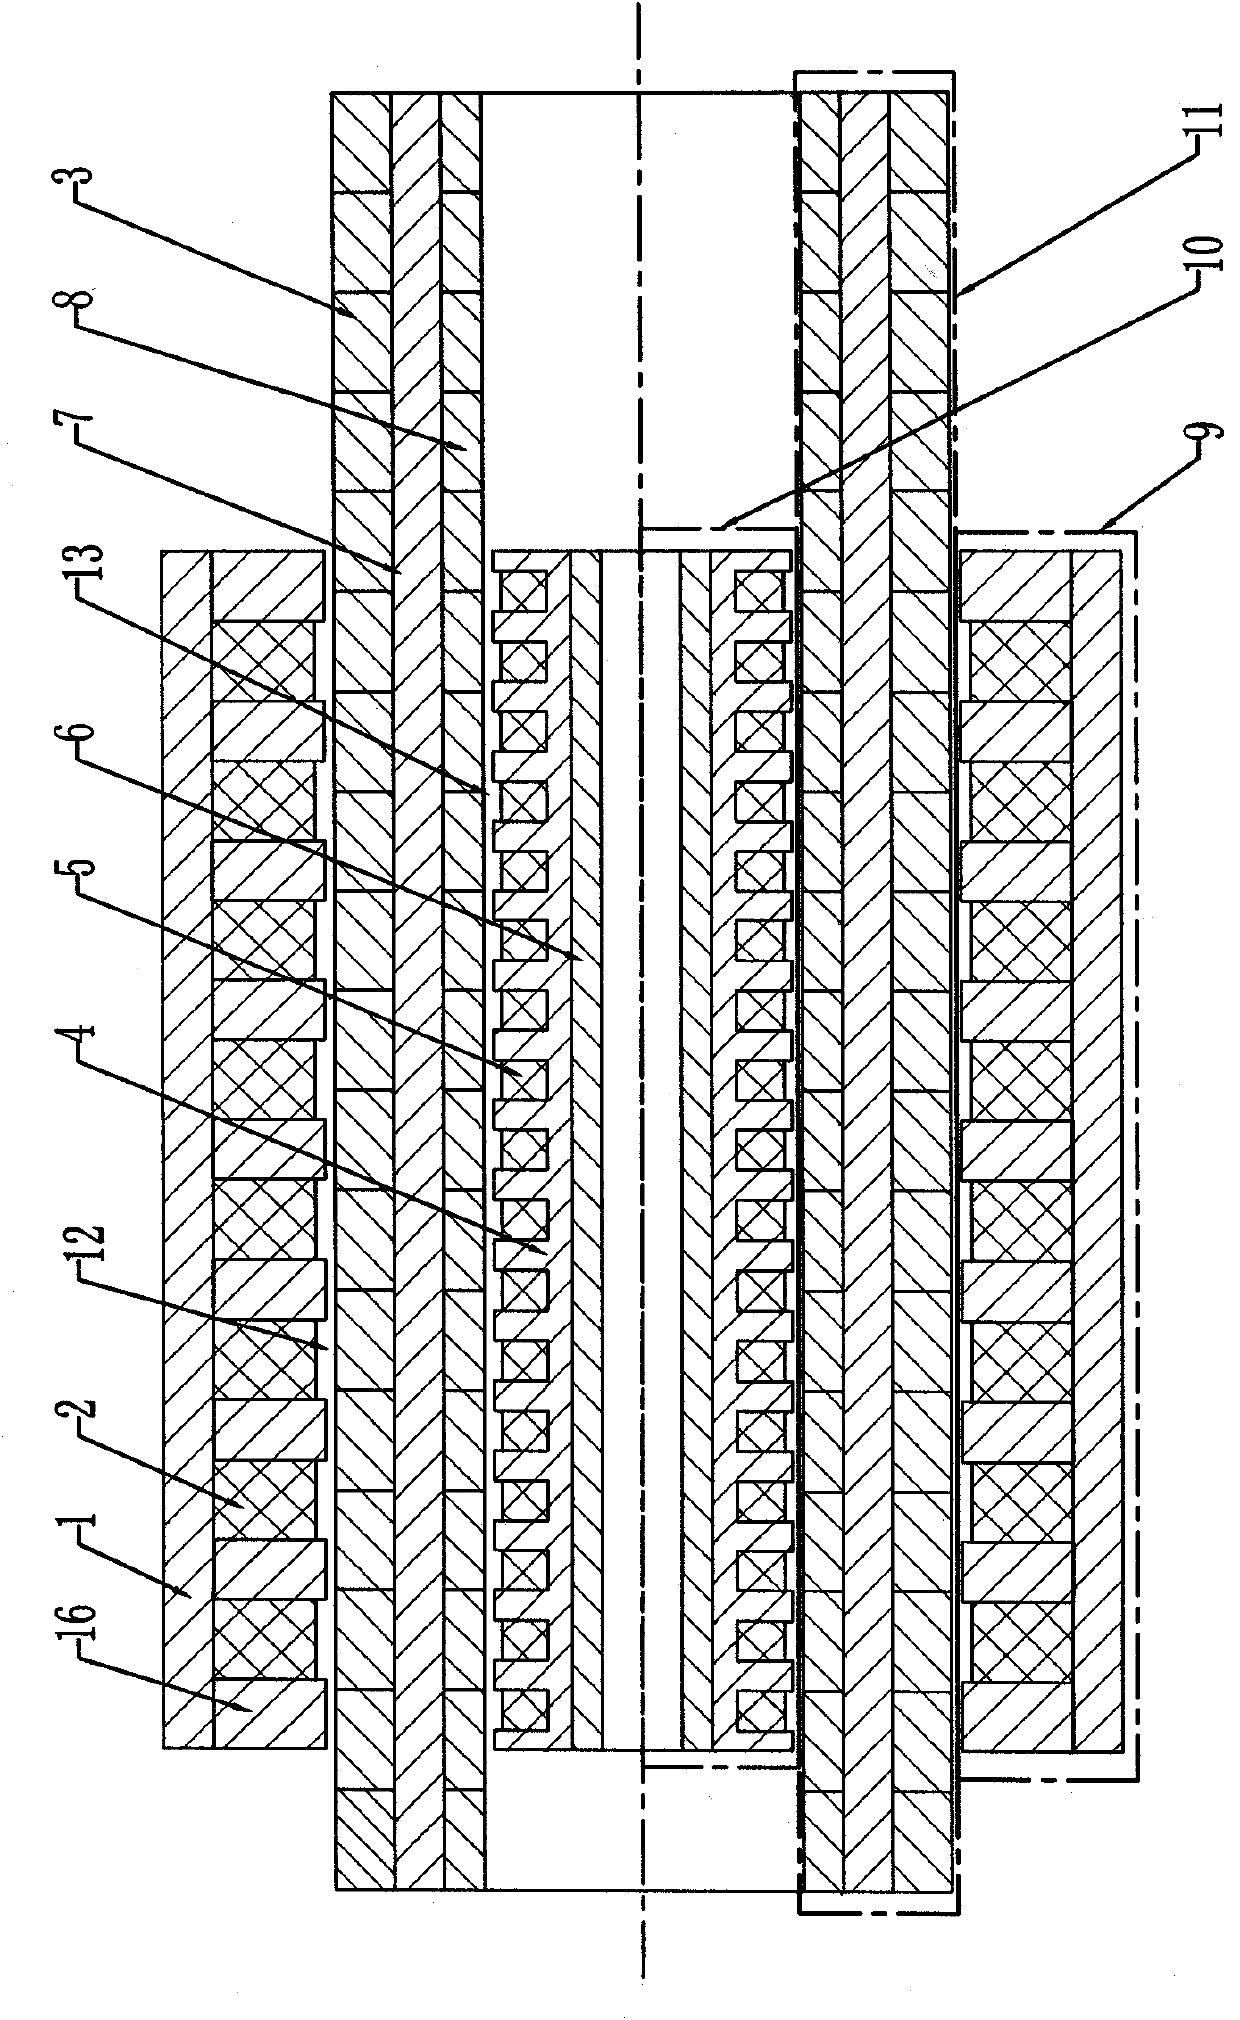 Cylindrical linear motor with double-layer air gaps